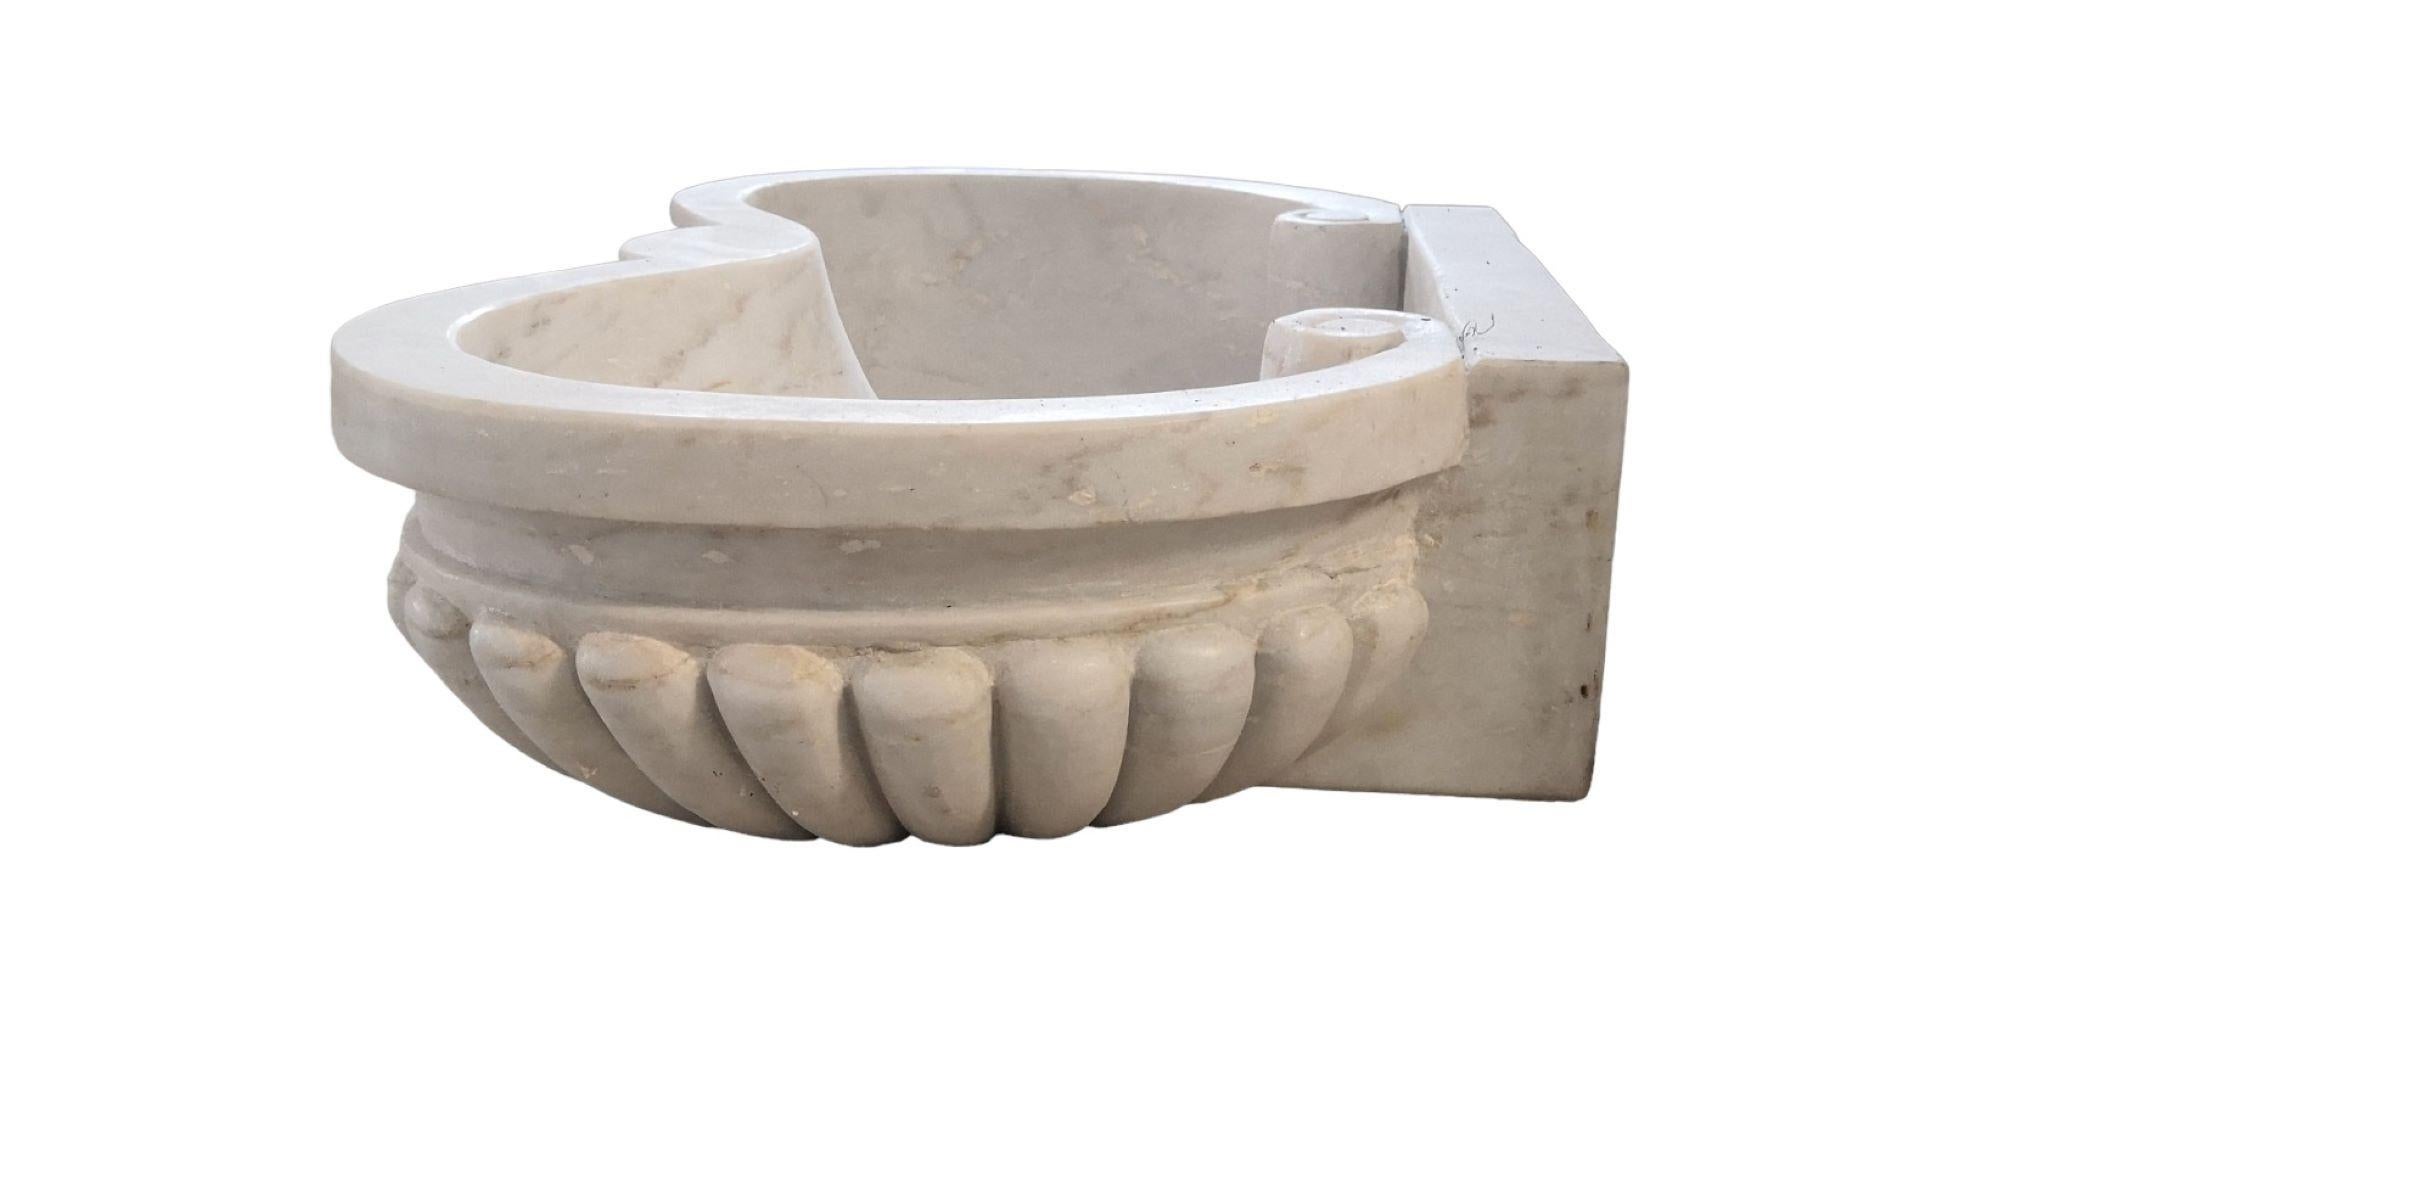 Classical Marble Sink Basin In Good Condition For Sale In Cranbrook, Kent